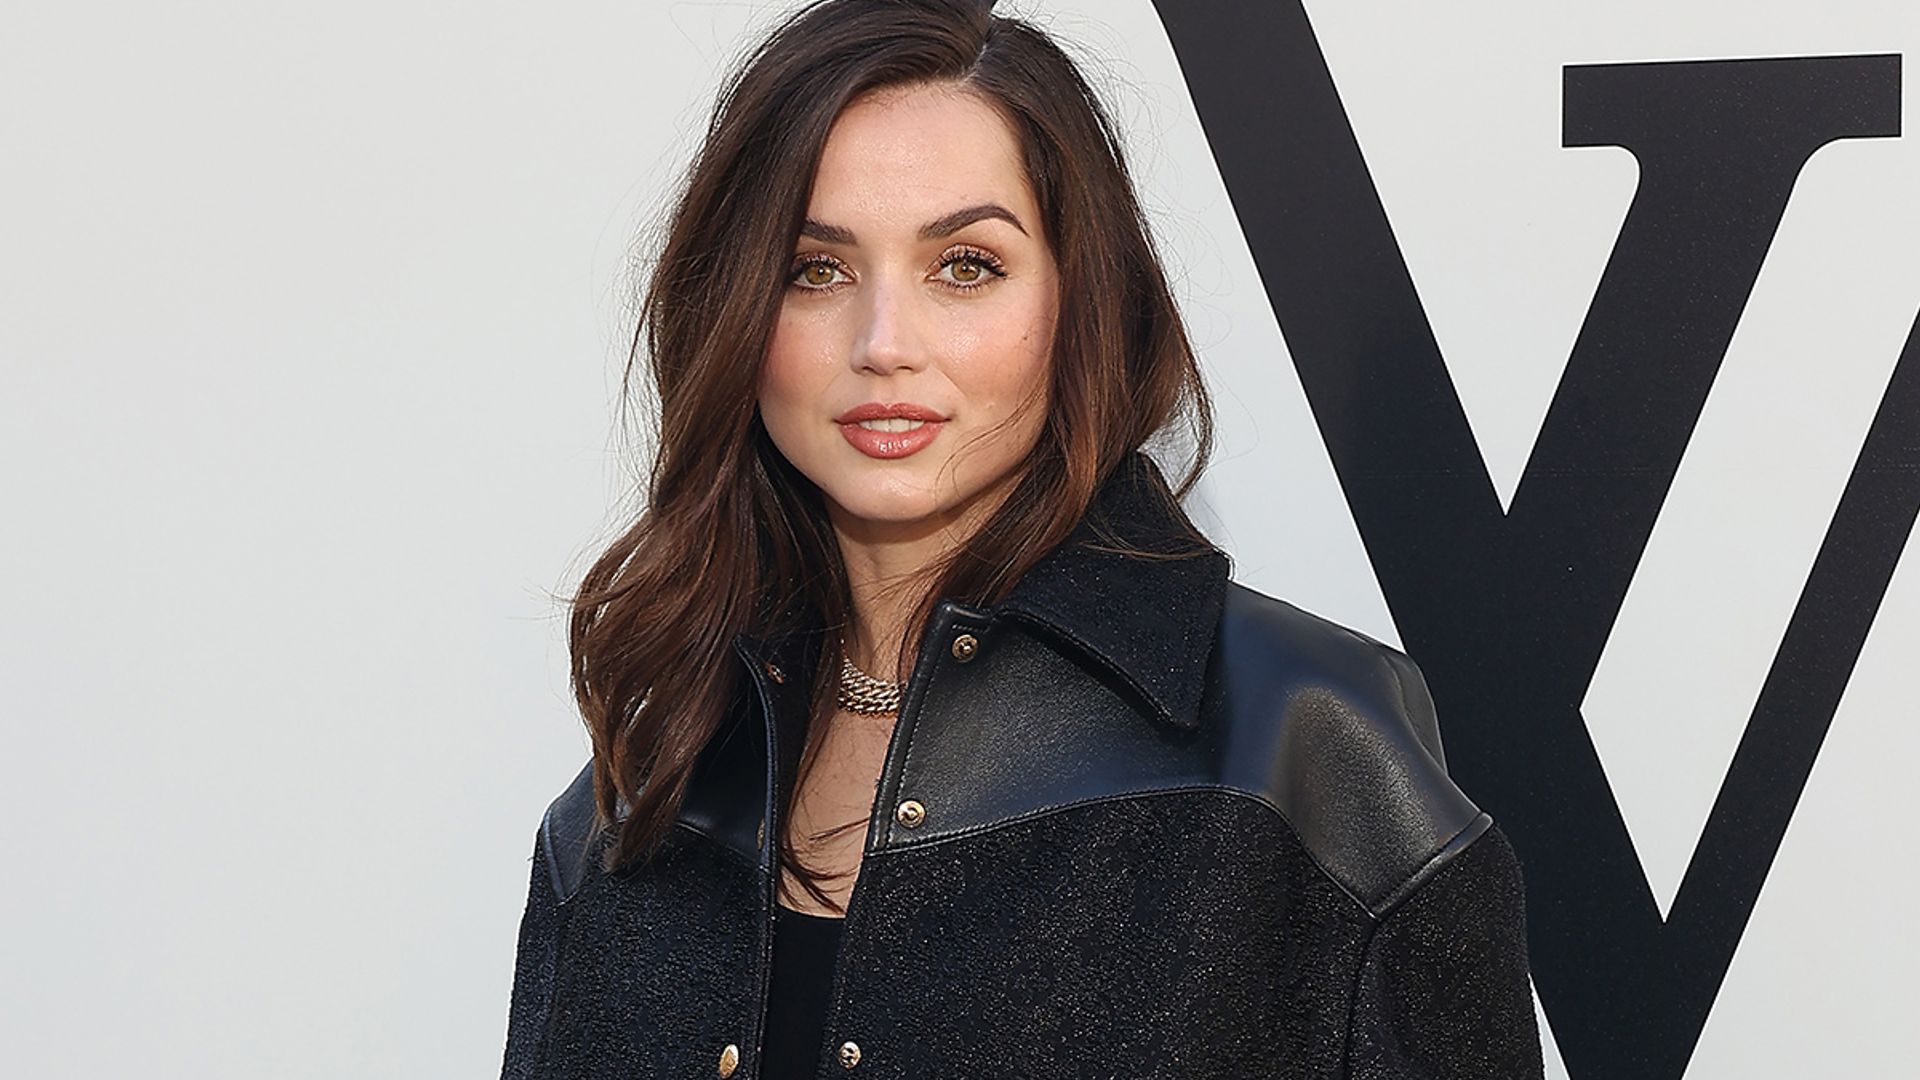 Knives Out: Ana de Armas Initially Felt The Movie Was NOT Right